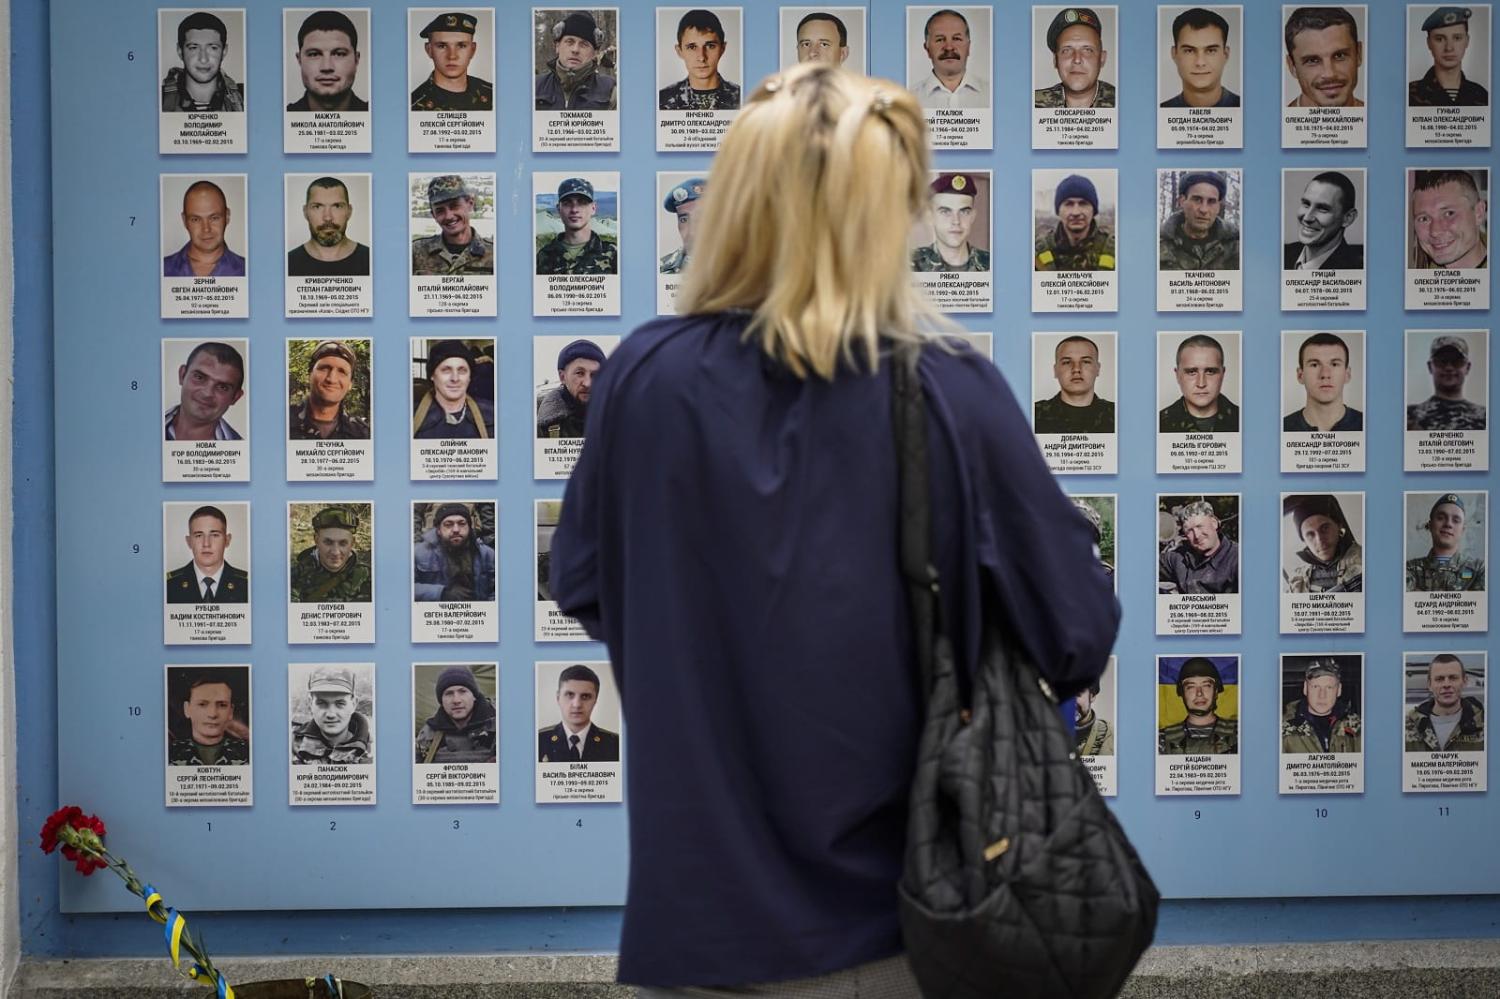 A woman looks at photos on the Wall of Remembrance of the Fallen for Ukraine on Mykhailivska Square in Kyiv (Oleg Pereverzev/Global Images Ukraine via Getty Images)